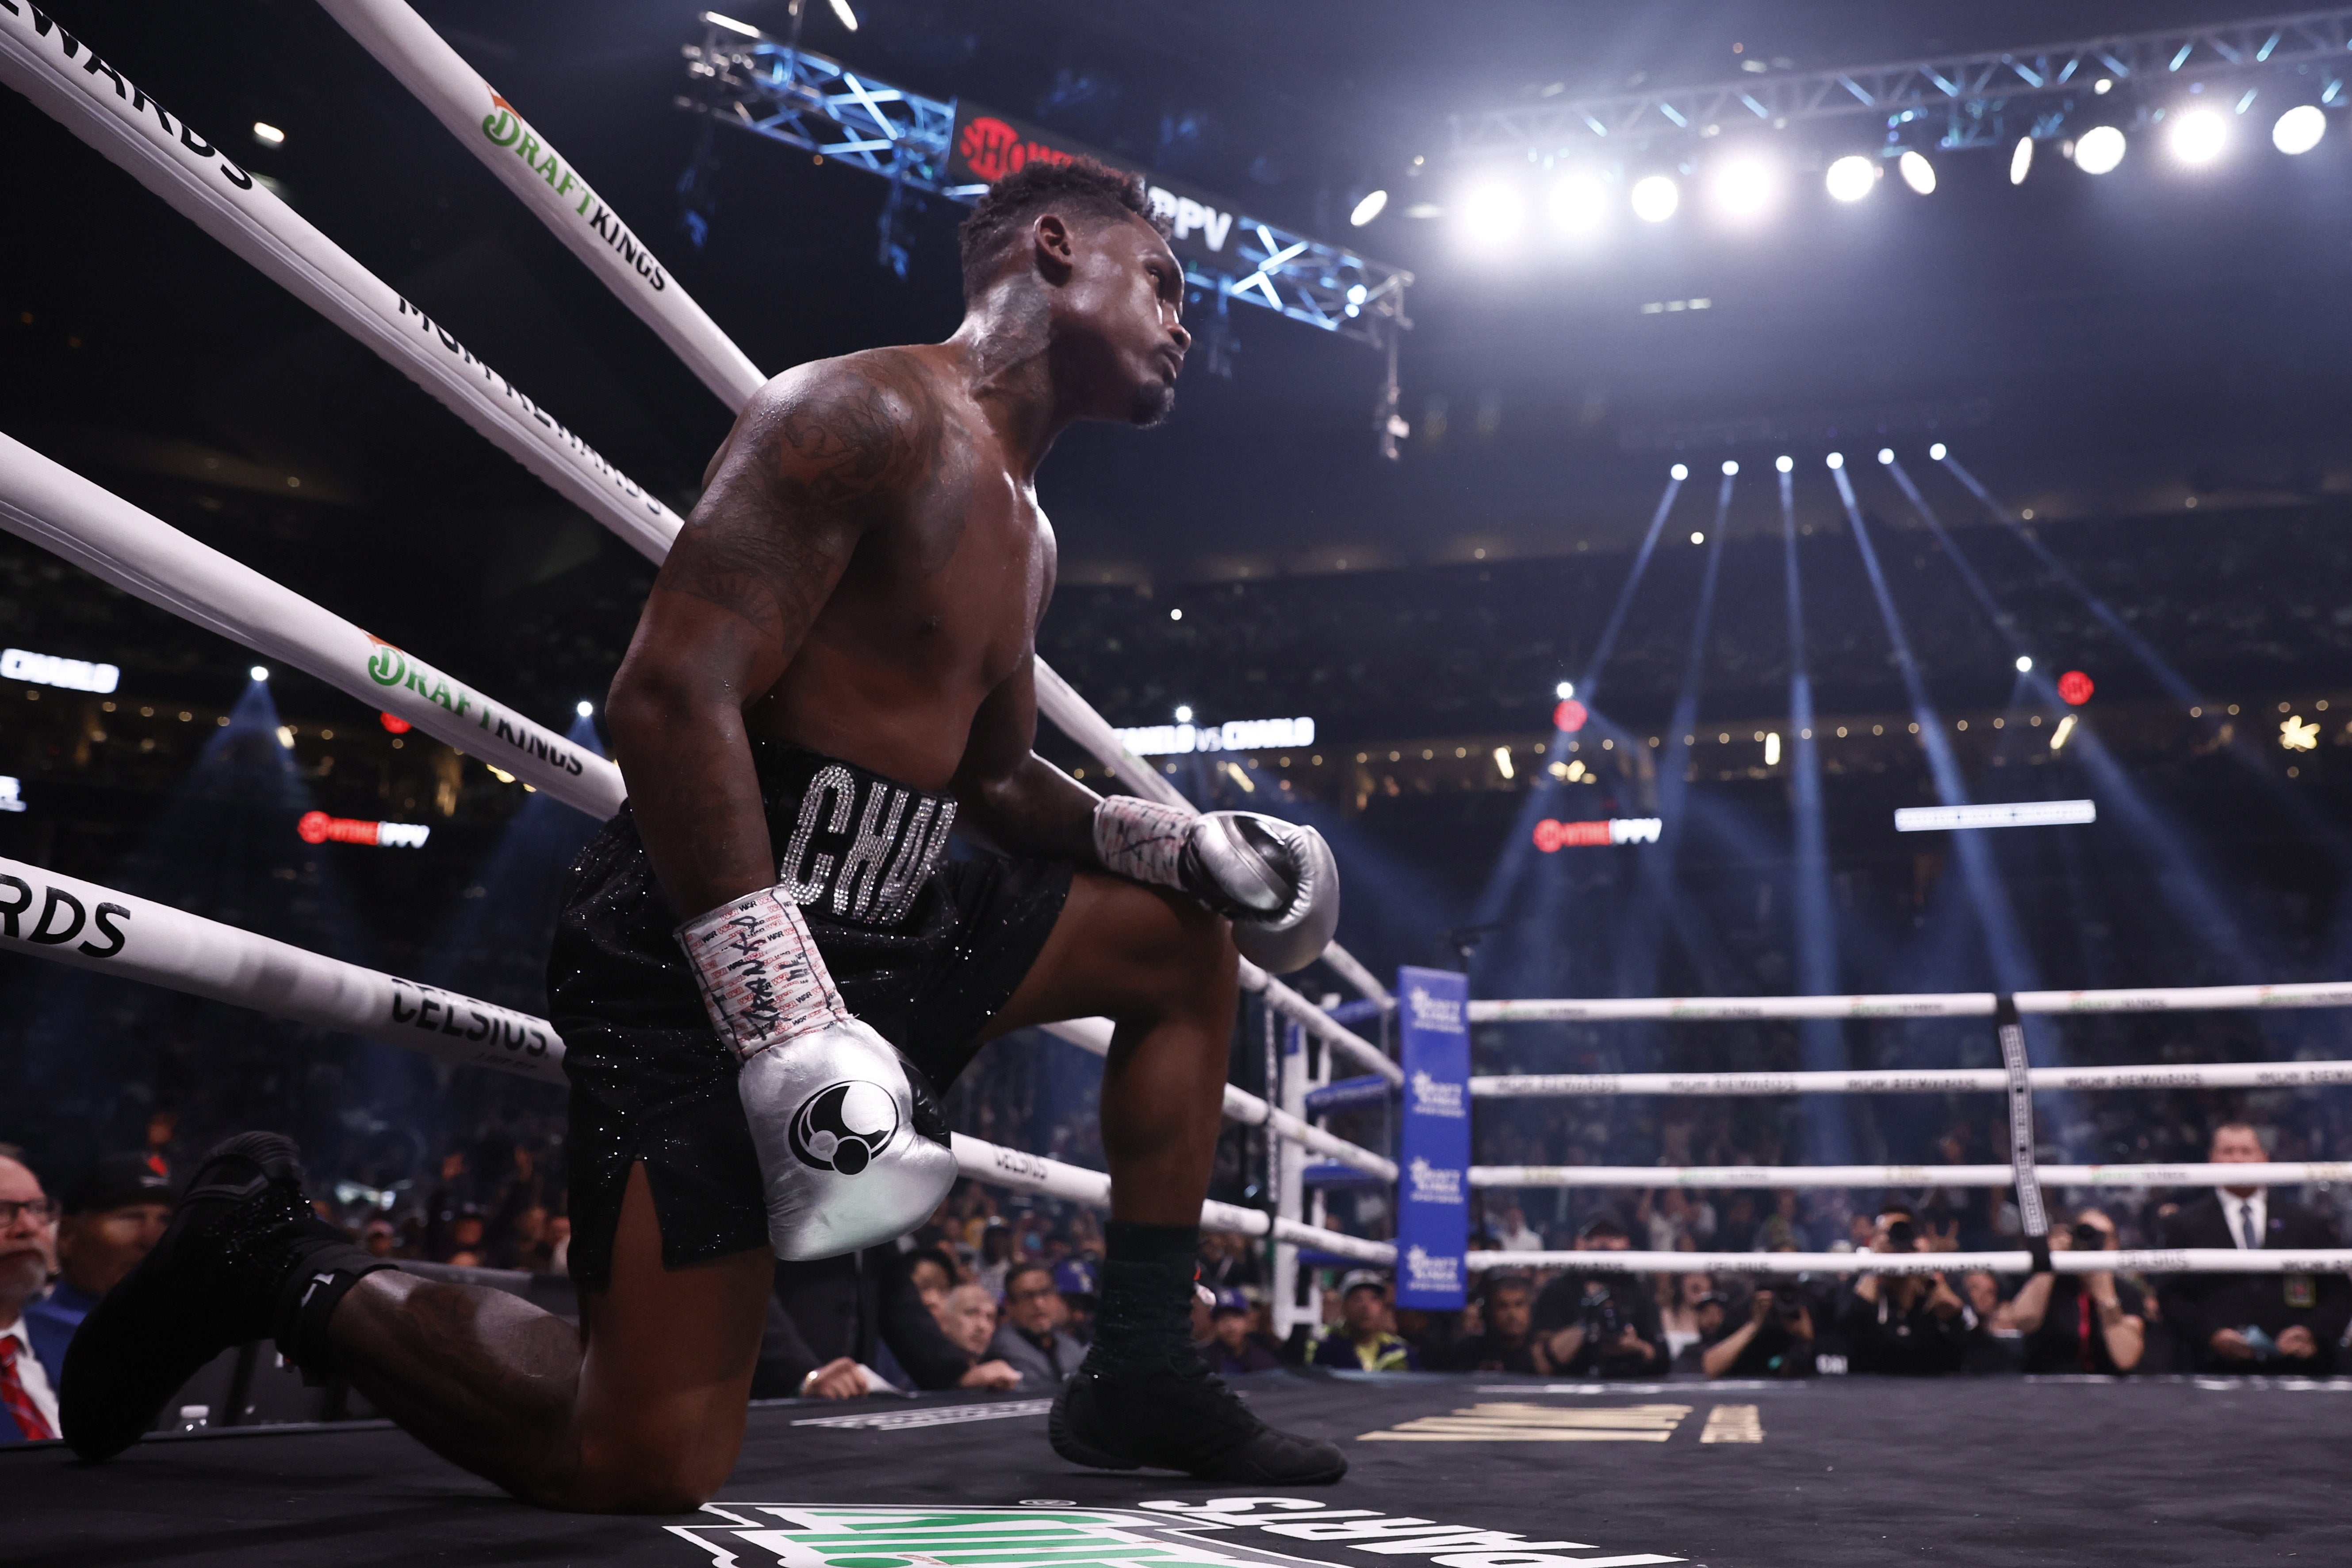 Jermell Charlo was dropped to a knee in Round 7 against Canelo Alvarez